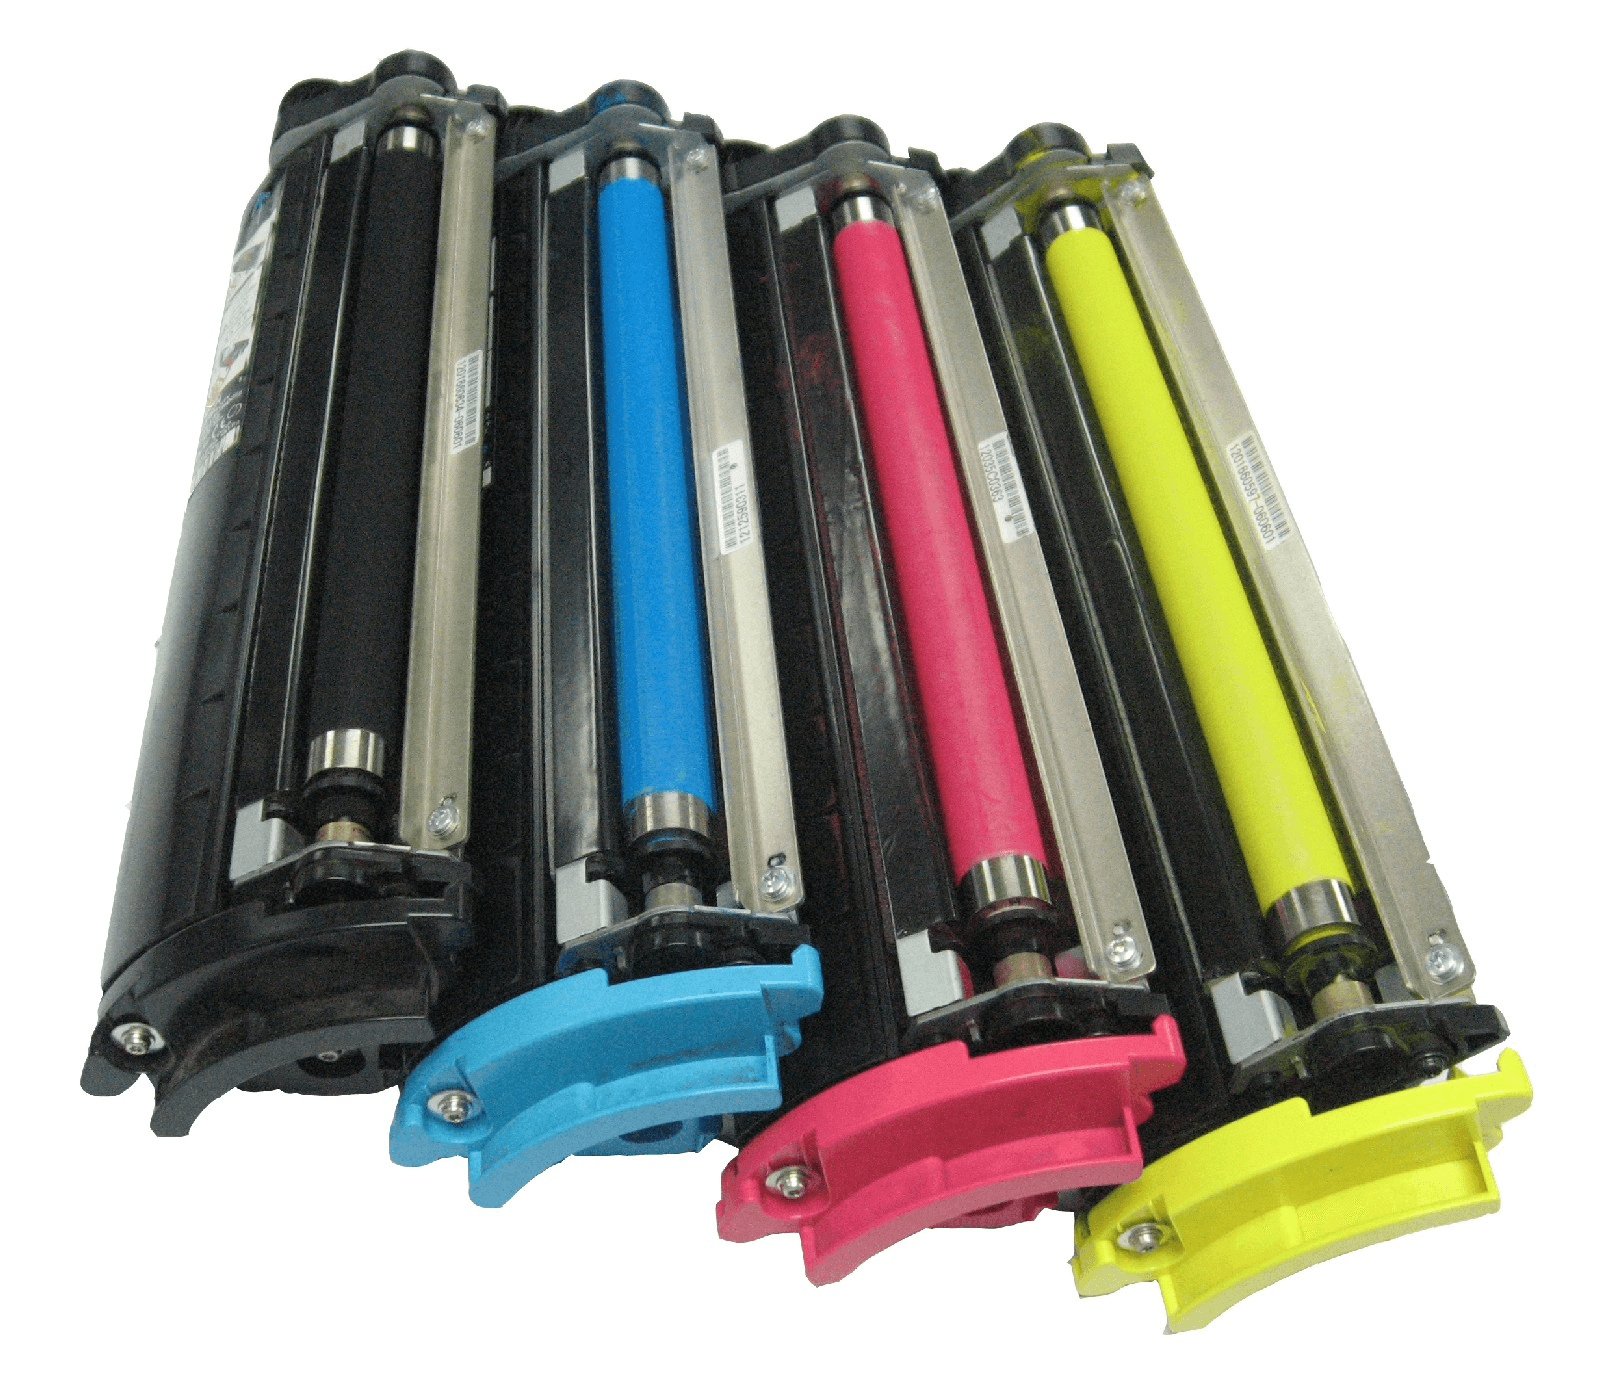 How to Select Toner and Ink Cartridges